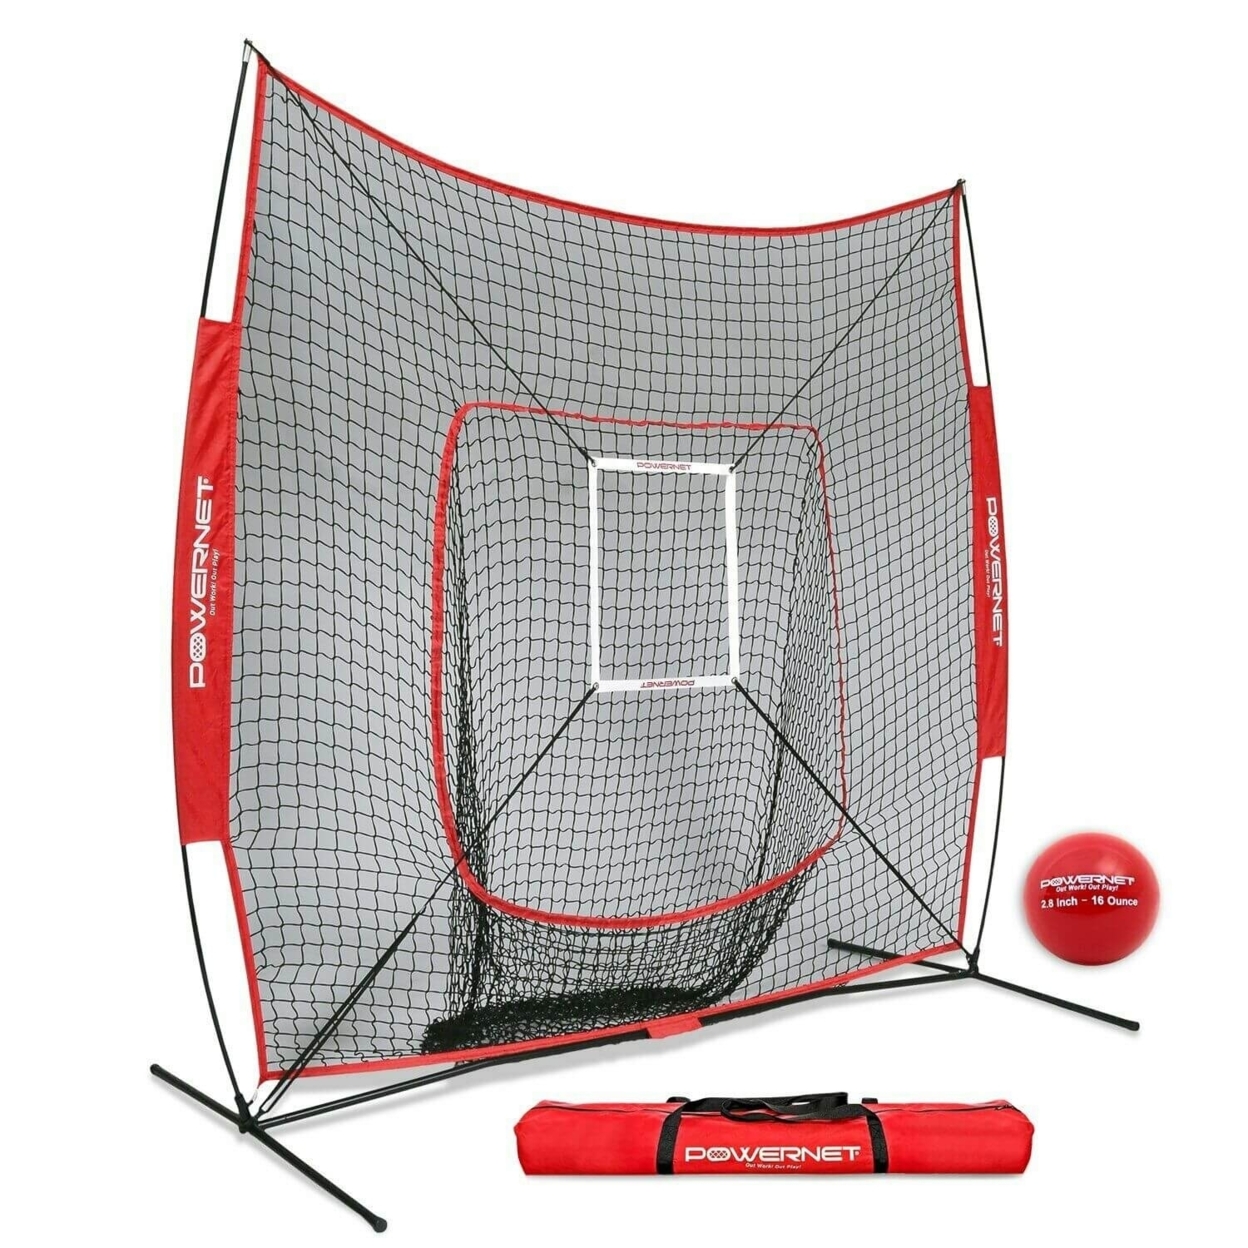 PowerNet DLX 7x7 Baseball Softball Hitting Net + Weighted Heavy Ball + Strike Zone Attachment + Carry Bag - Red